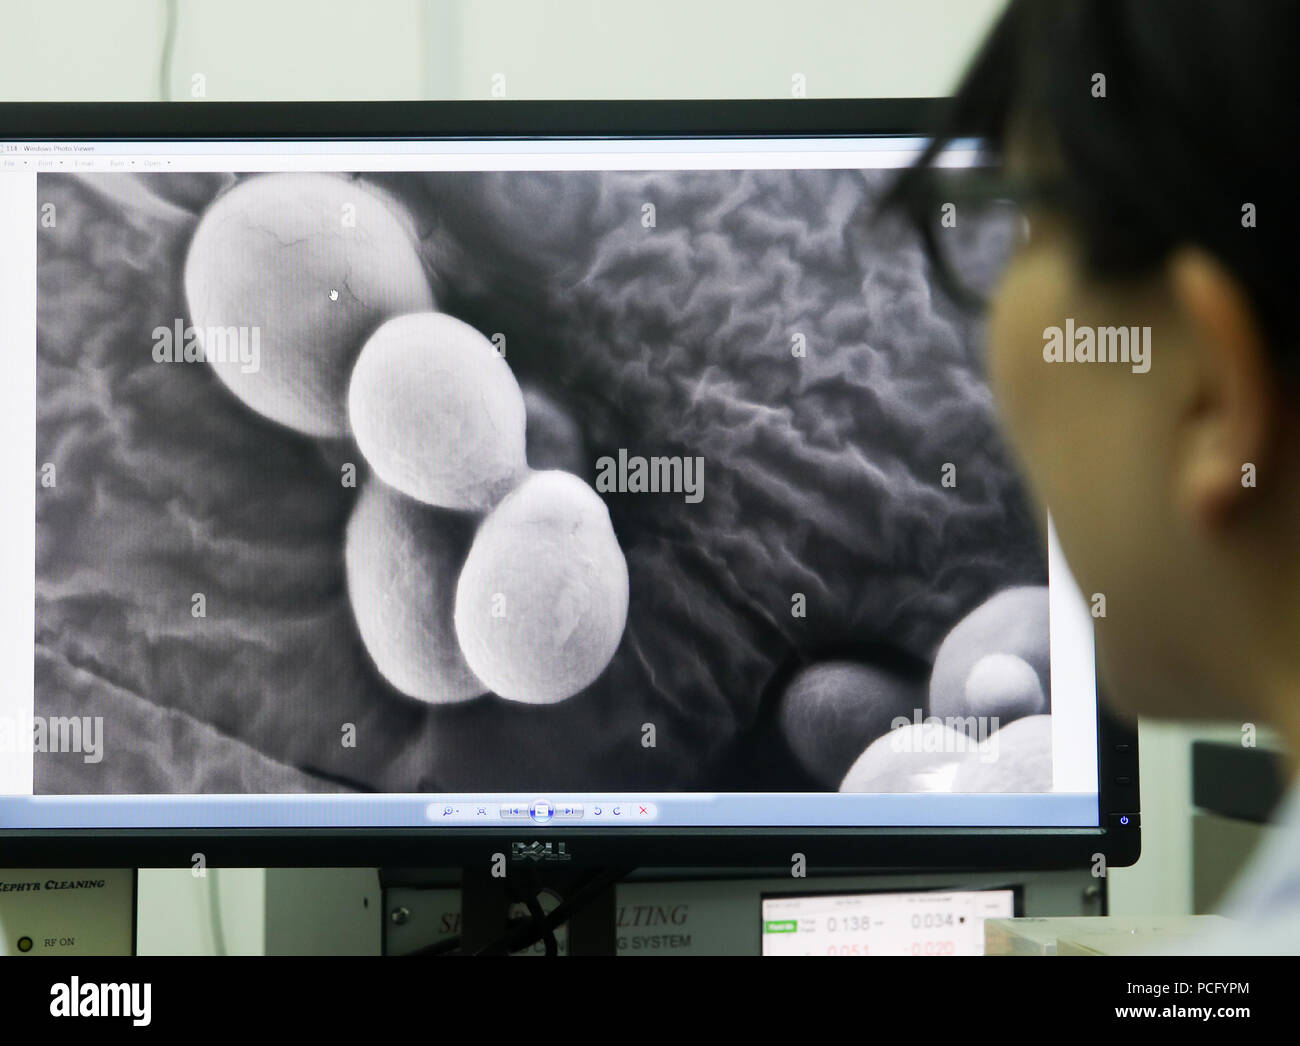 (180802) -- SHANGHAI, Aug. 2, 2018 (Xinhua) -- A team member of molecular biologist Qin Zhongjun watches a single chromosome yeast strain through electron microscope at the Center for Excellence in Molecular Plant Sciences, Shanghai Institute of Plant Physiology and Ecology, of Chinese Academy of Sciences in Shanghai, east China, July 31, 2018. Brewer's yeast, one-third of whose genome is said to share ancestry with a human's, has 16 chromosomes. However, Chinese scientists have managed to fit nearly all its genetic material into just one chromosome while not affecting the majority of its func Stock Photo